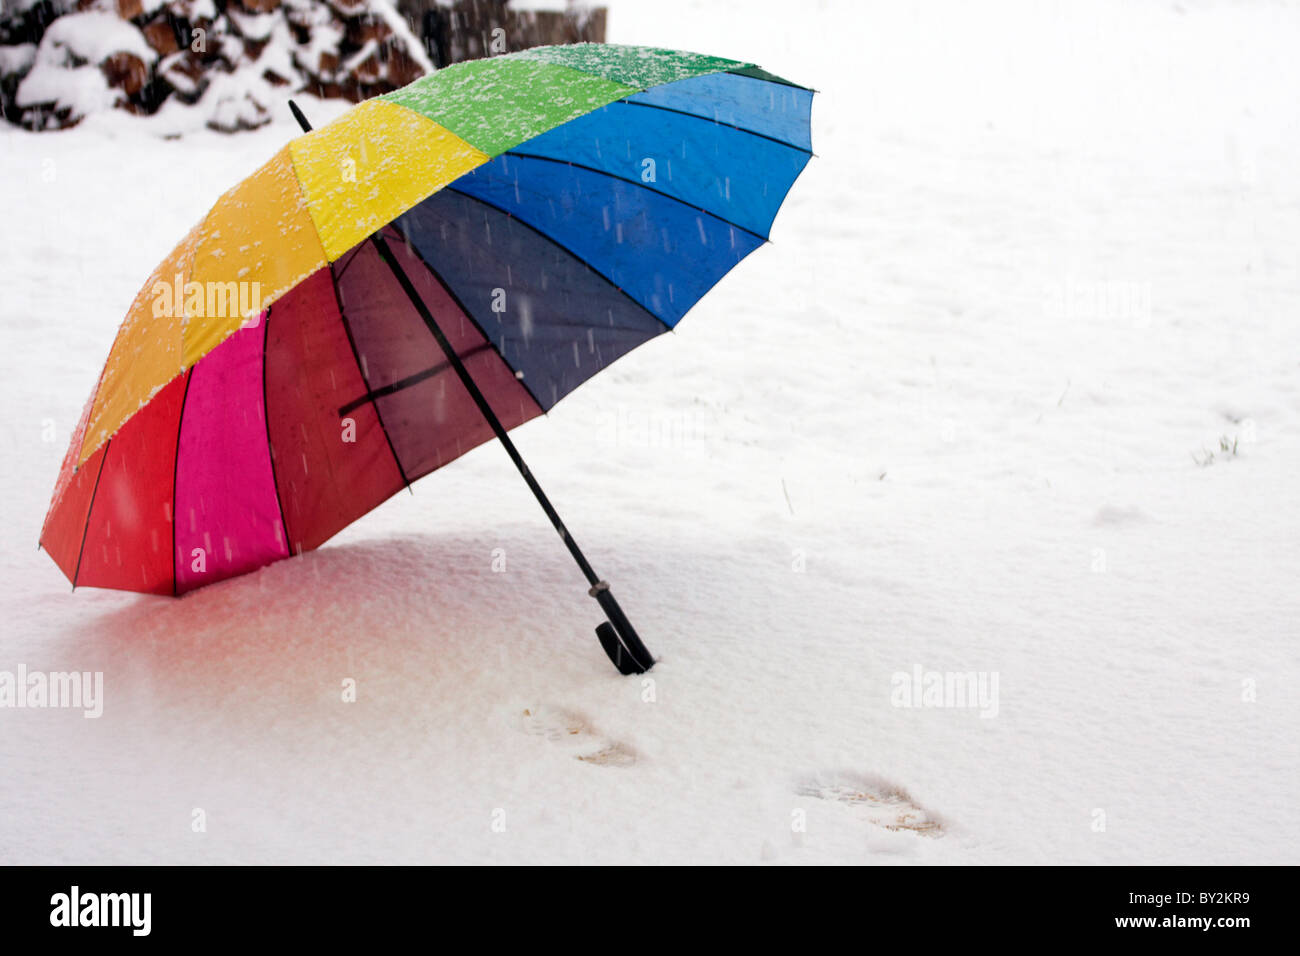 Opened umbrella on the ground in the winter blizzard. Stock Photo